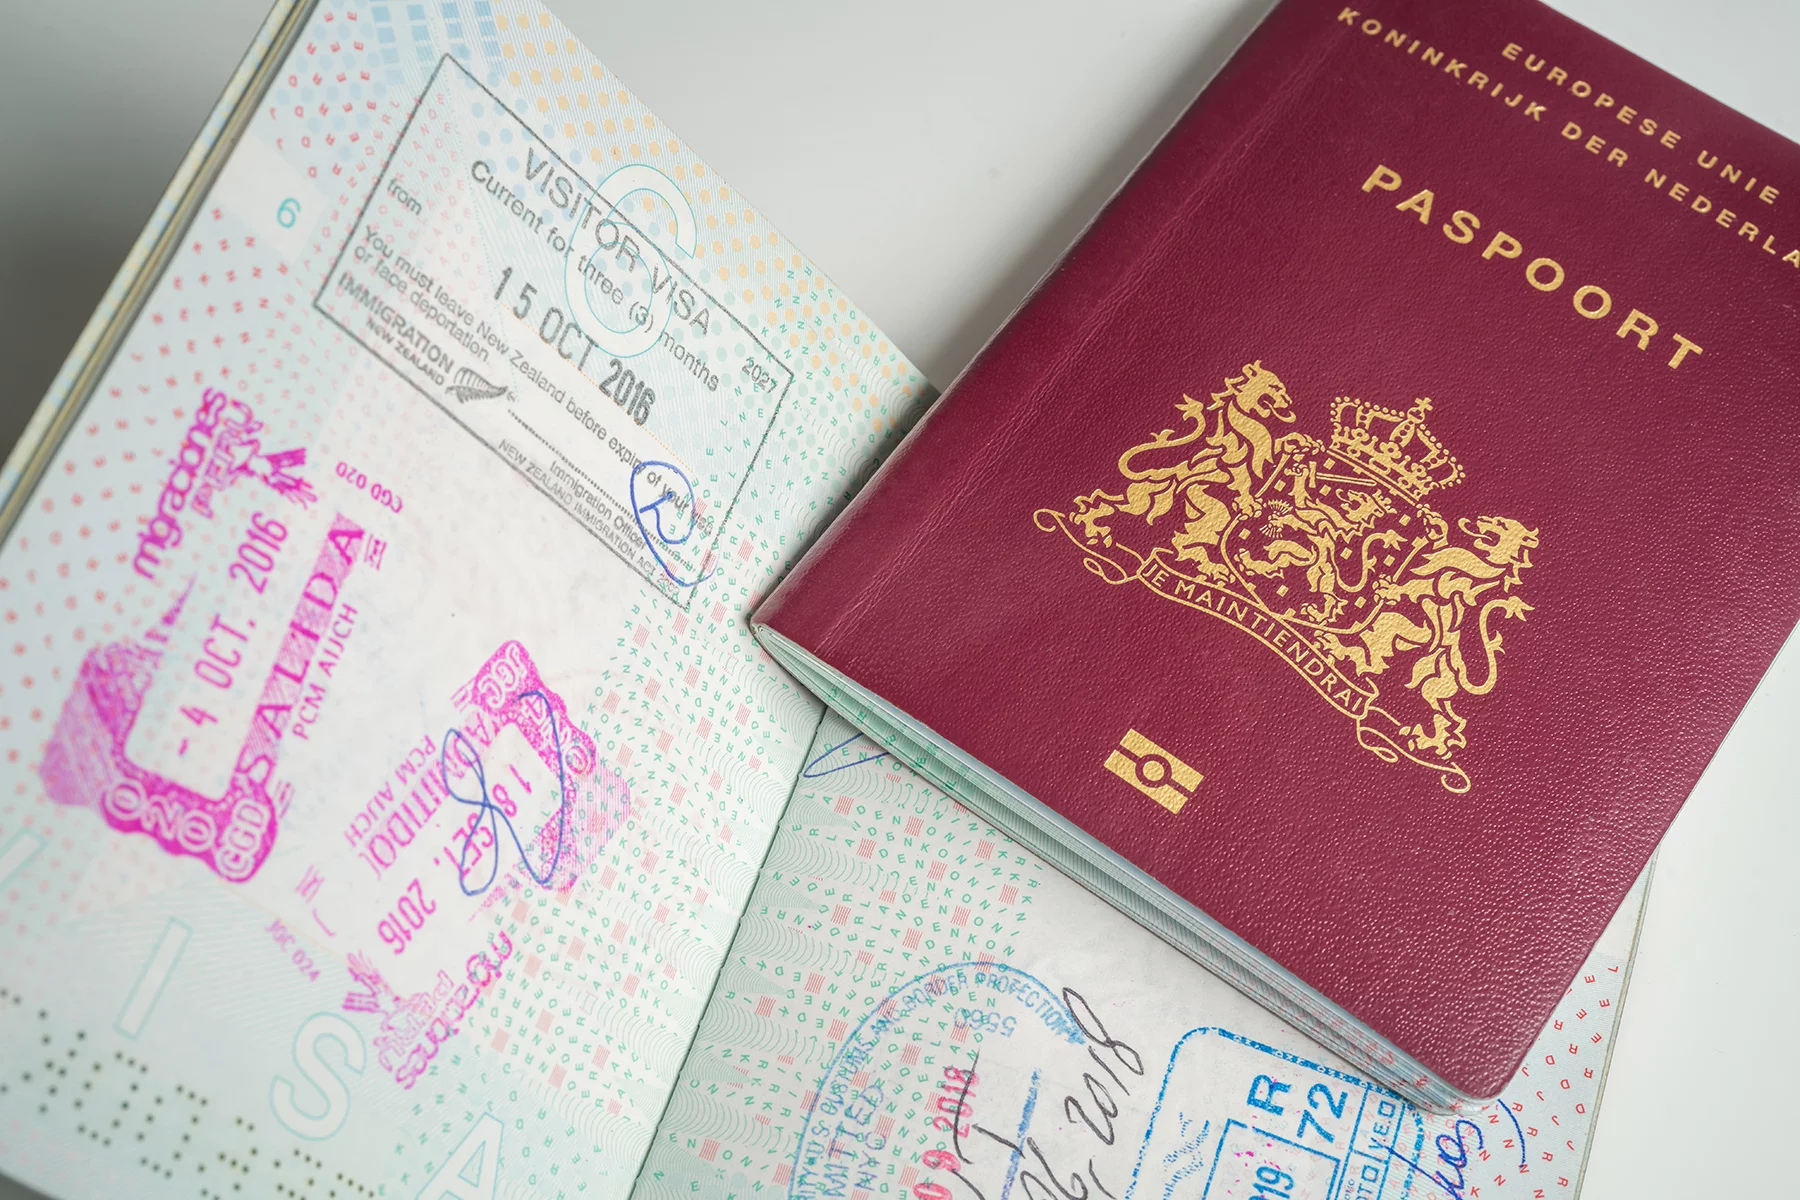 Two Dutch passports, one open with stamps